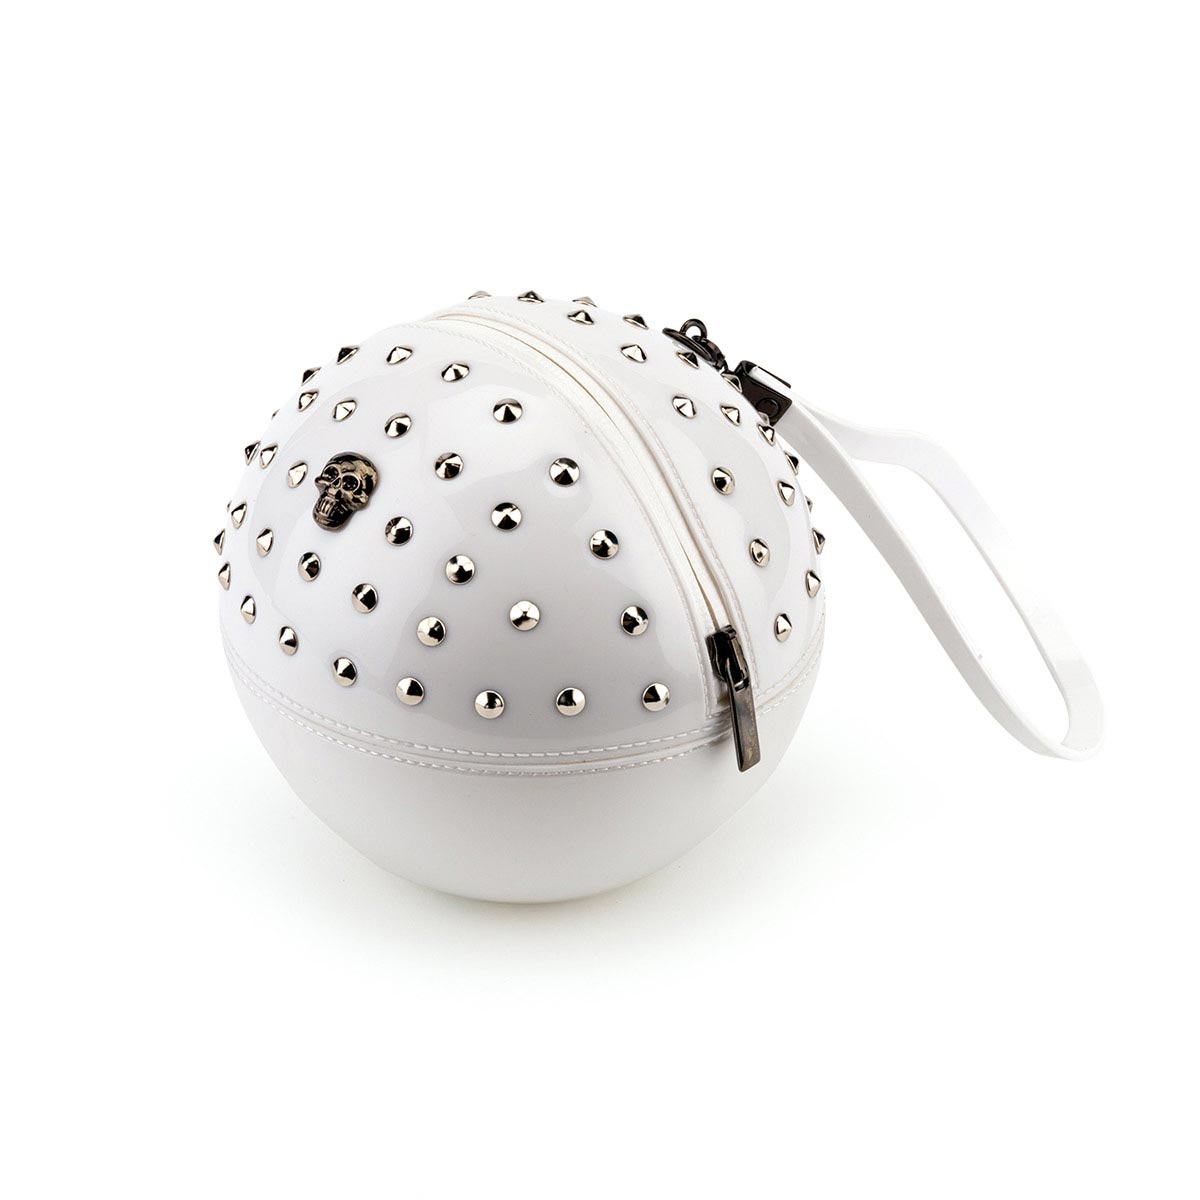 Pvc Sphere Bag with studs